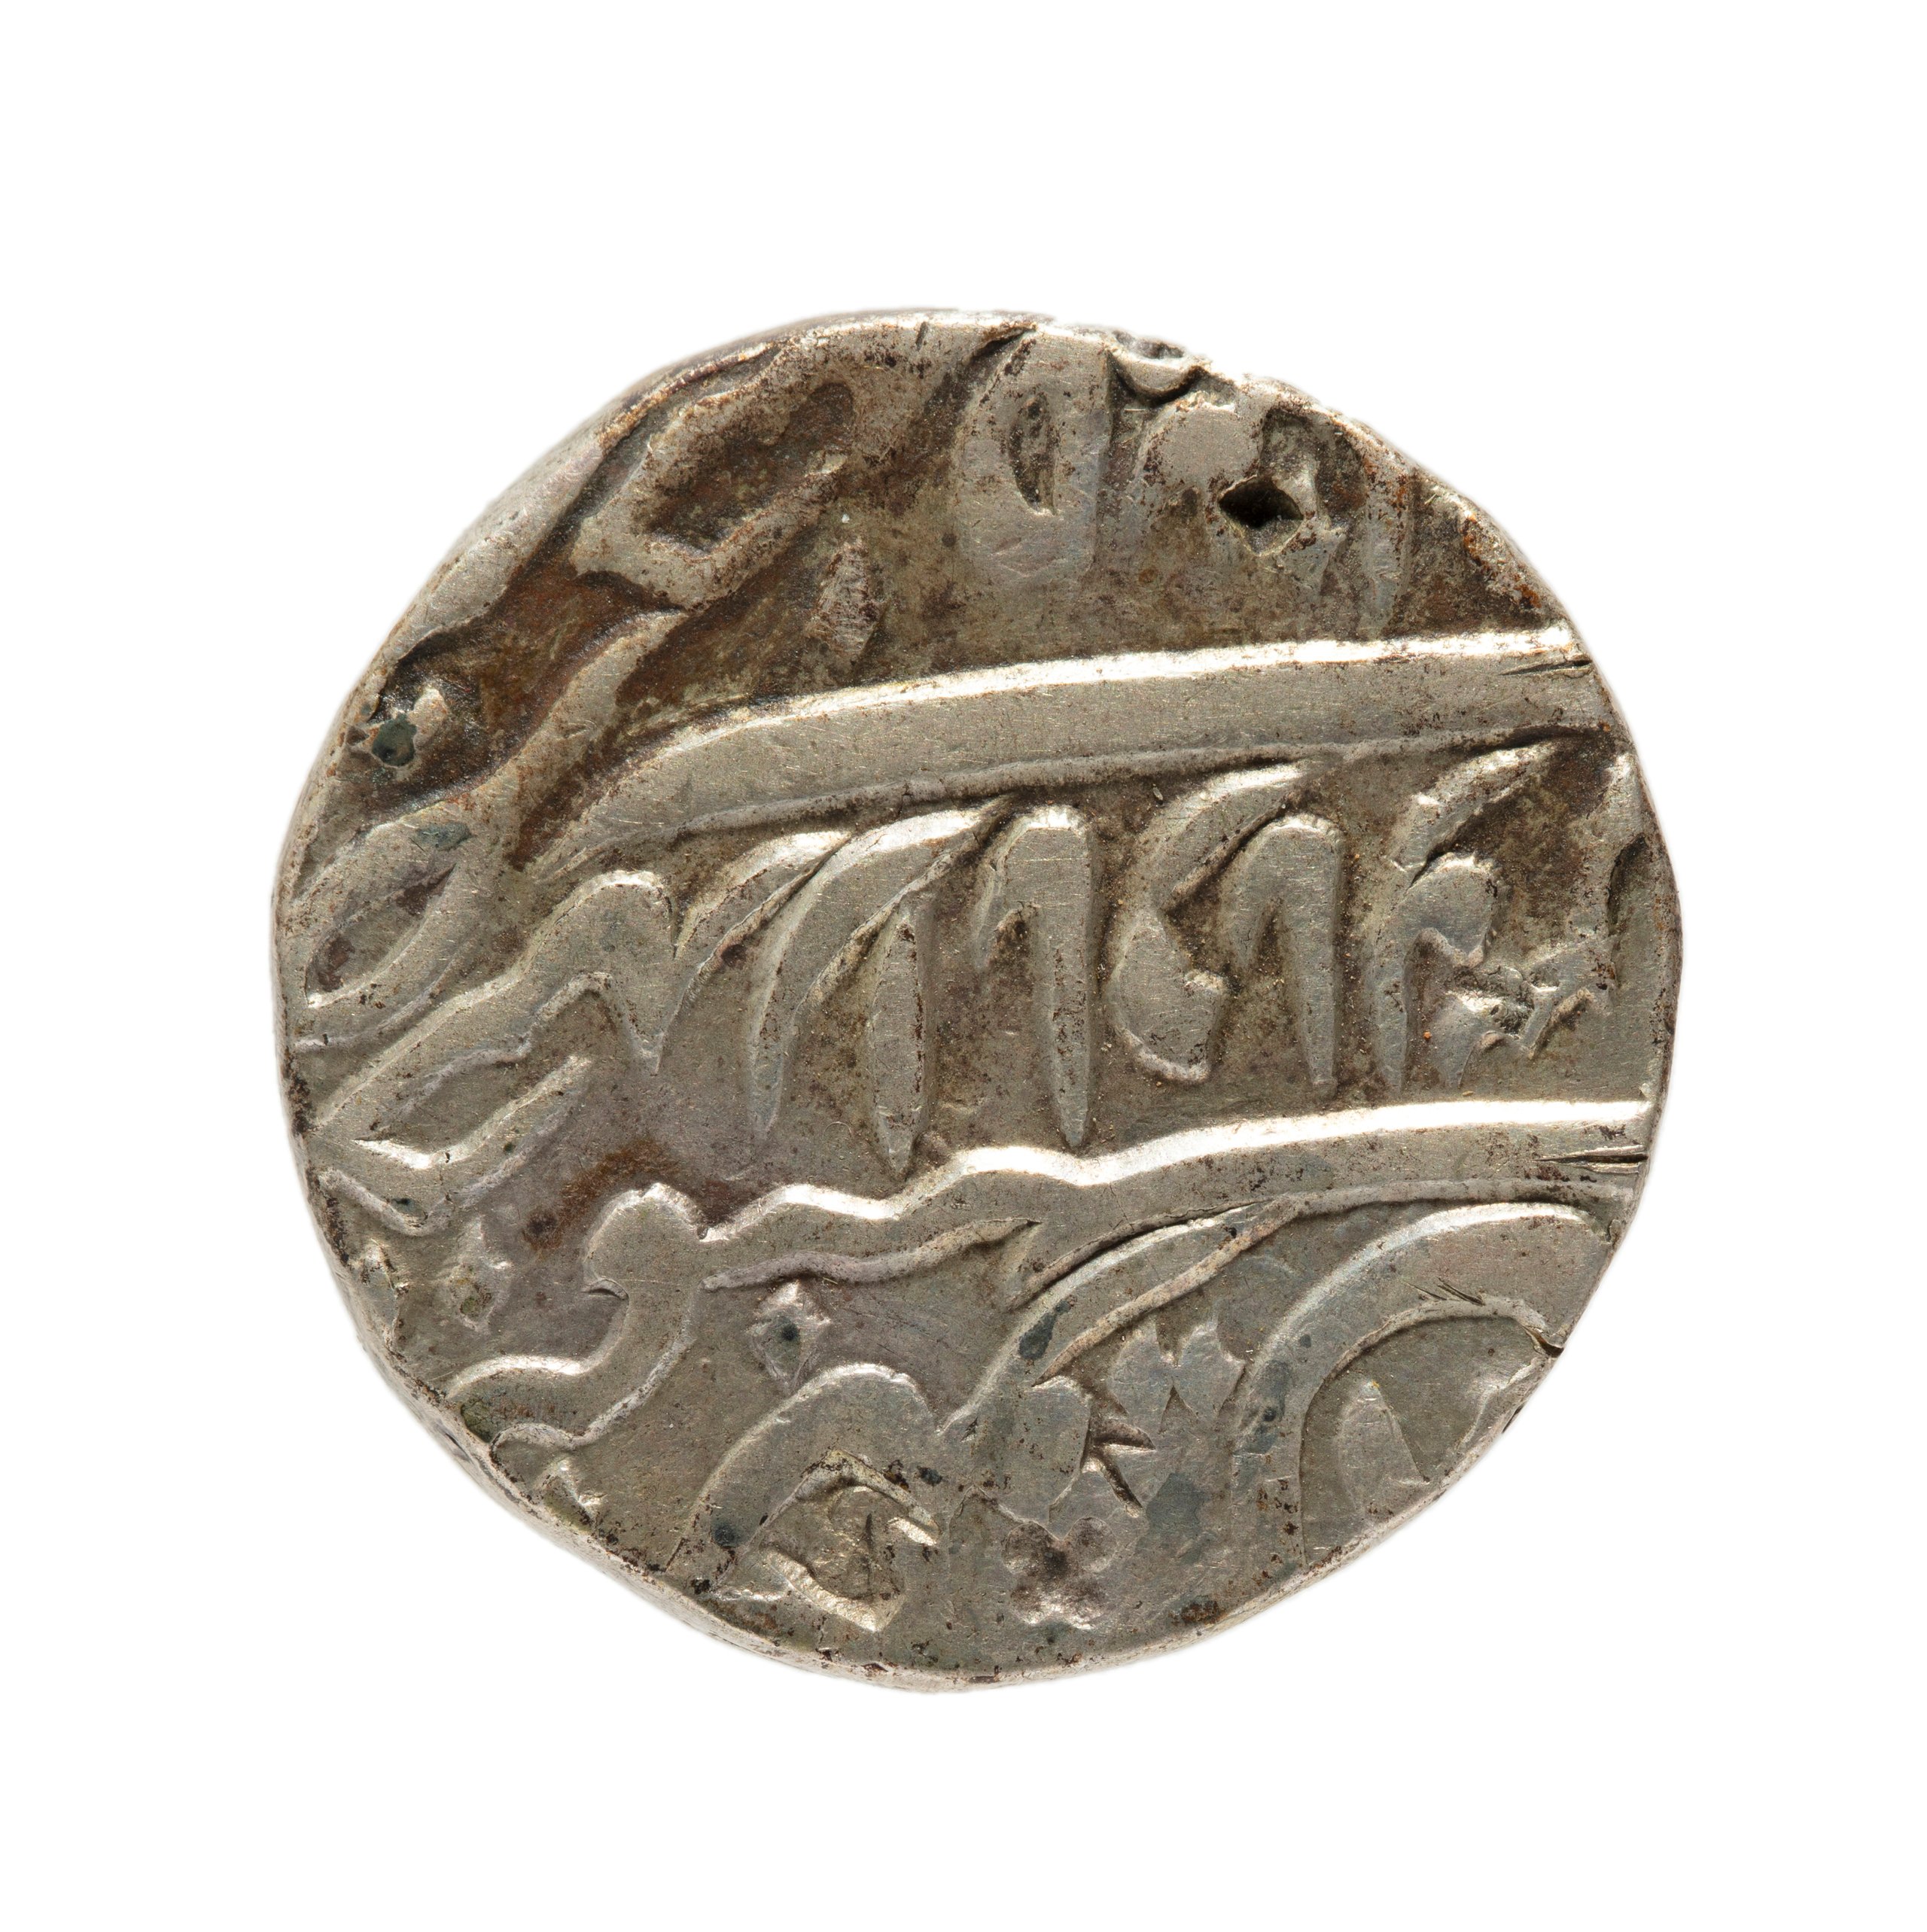 Indian Rupee coin